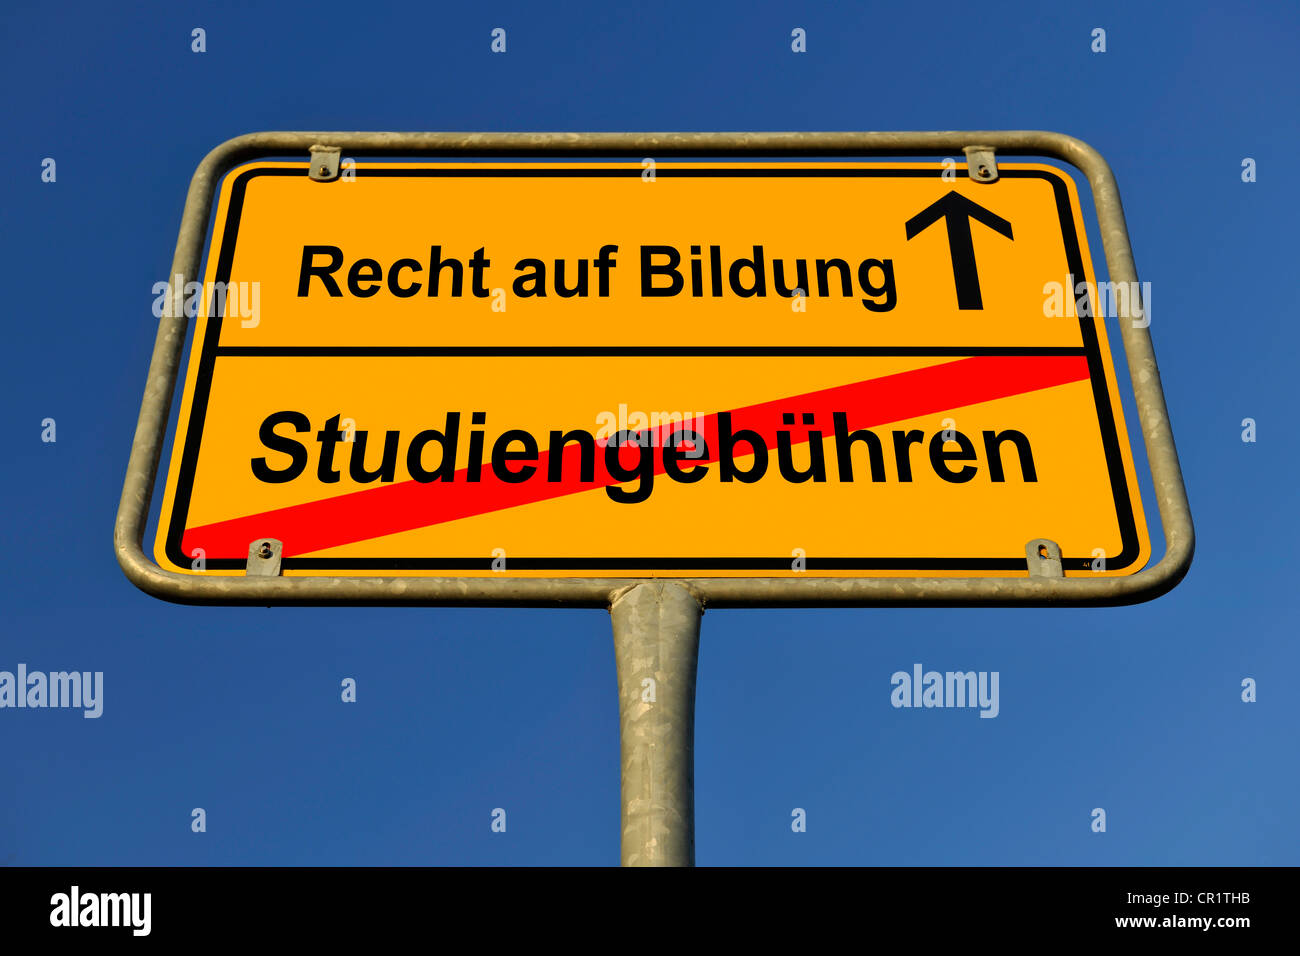 City limits sign with the words Recht auf Bildung and Studiengebuehren, German for the right to education and tuition fees, Stock Photo